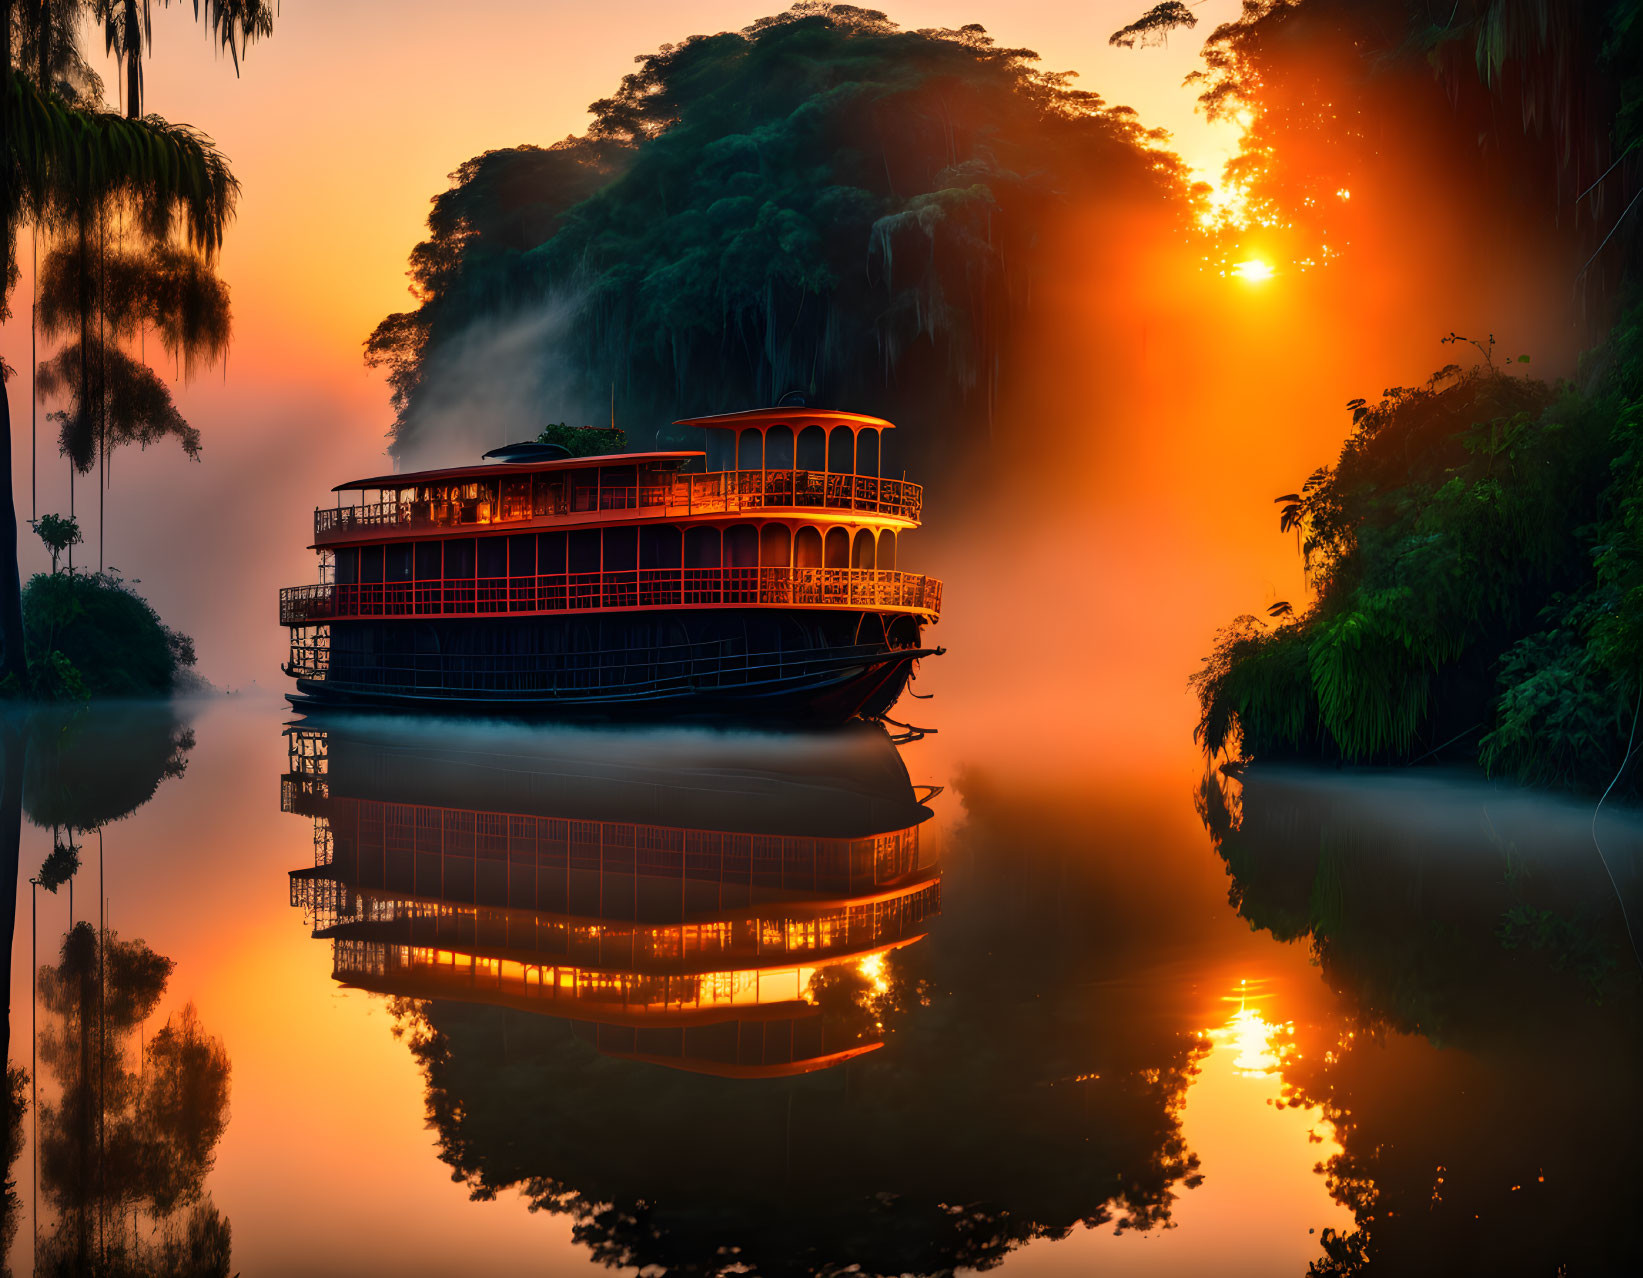 Tranquil sunset scene with paddle steamer on river